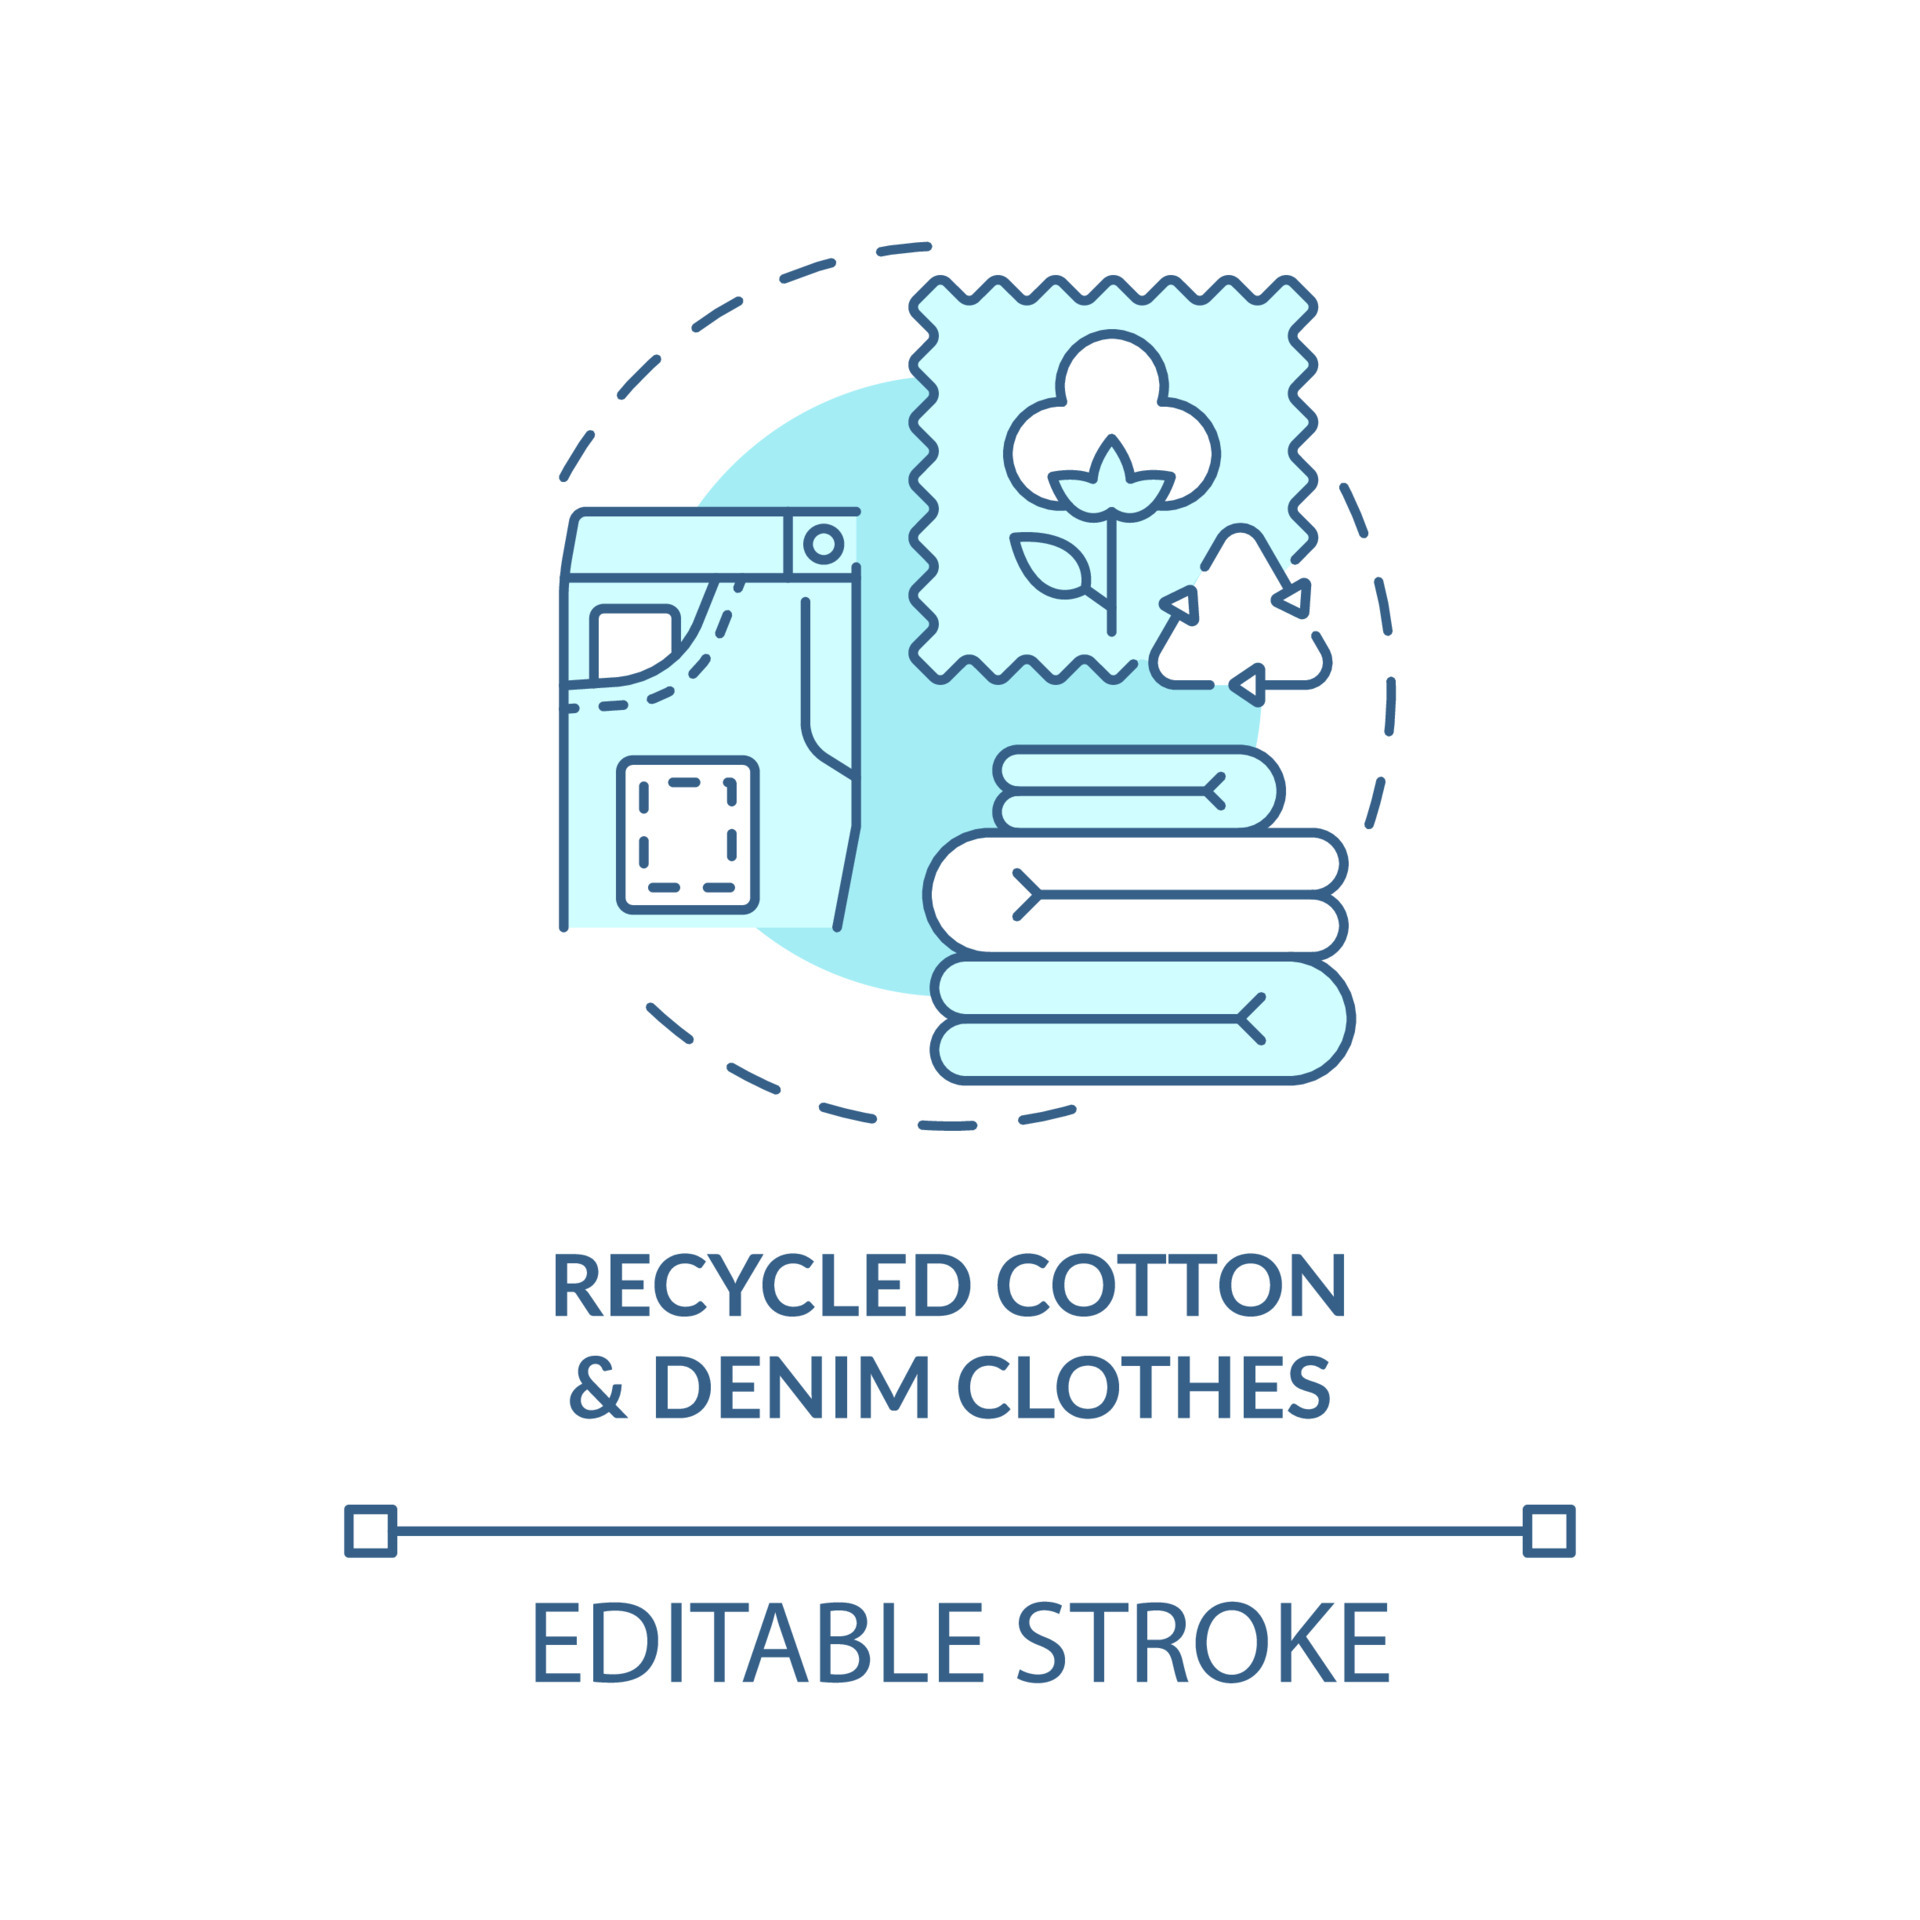 Recycled cotton, denim materials concept icon. Recycling of garbage ...